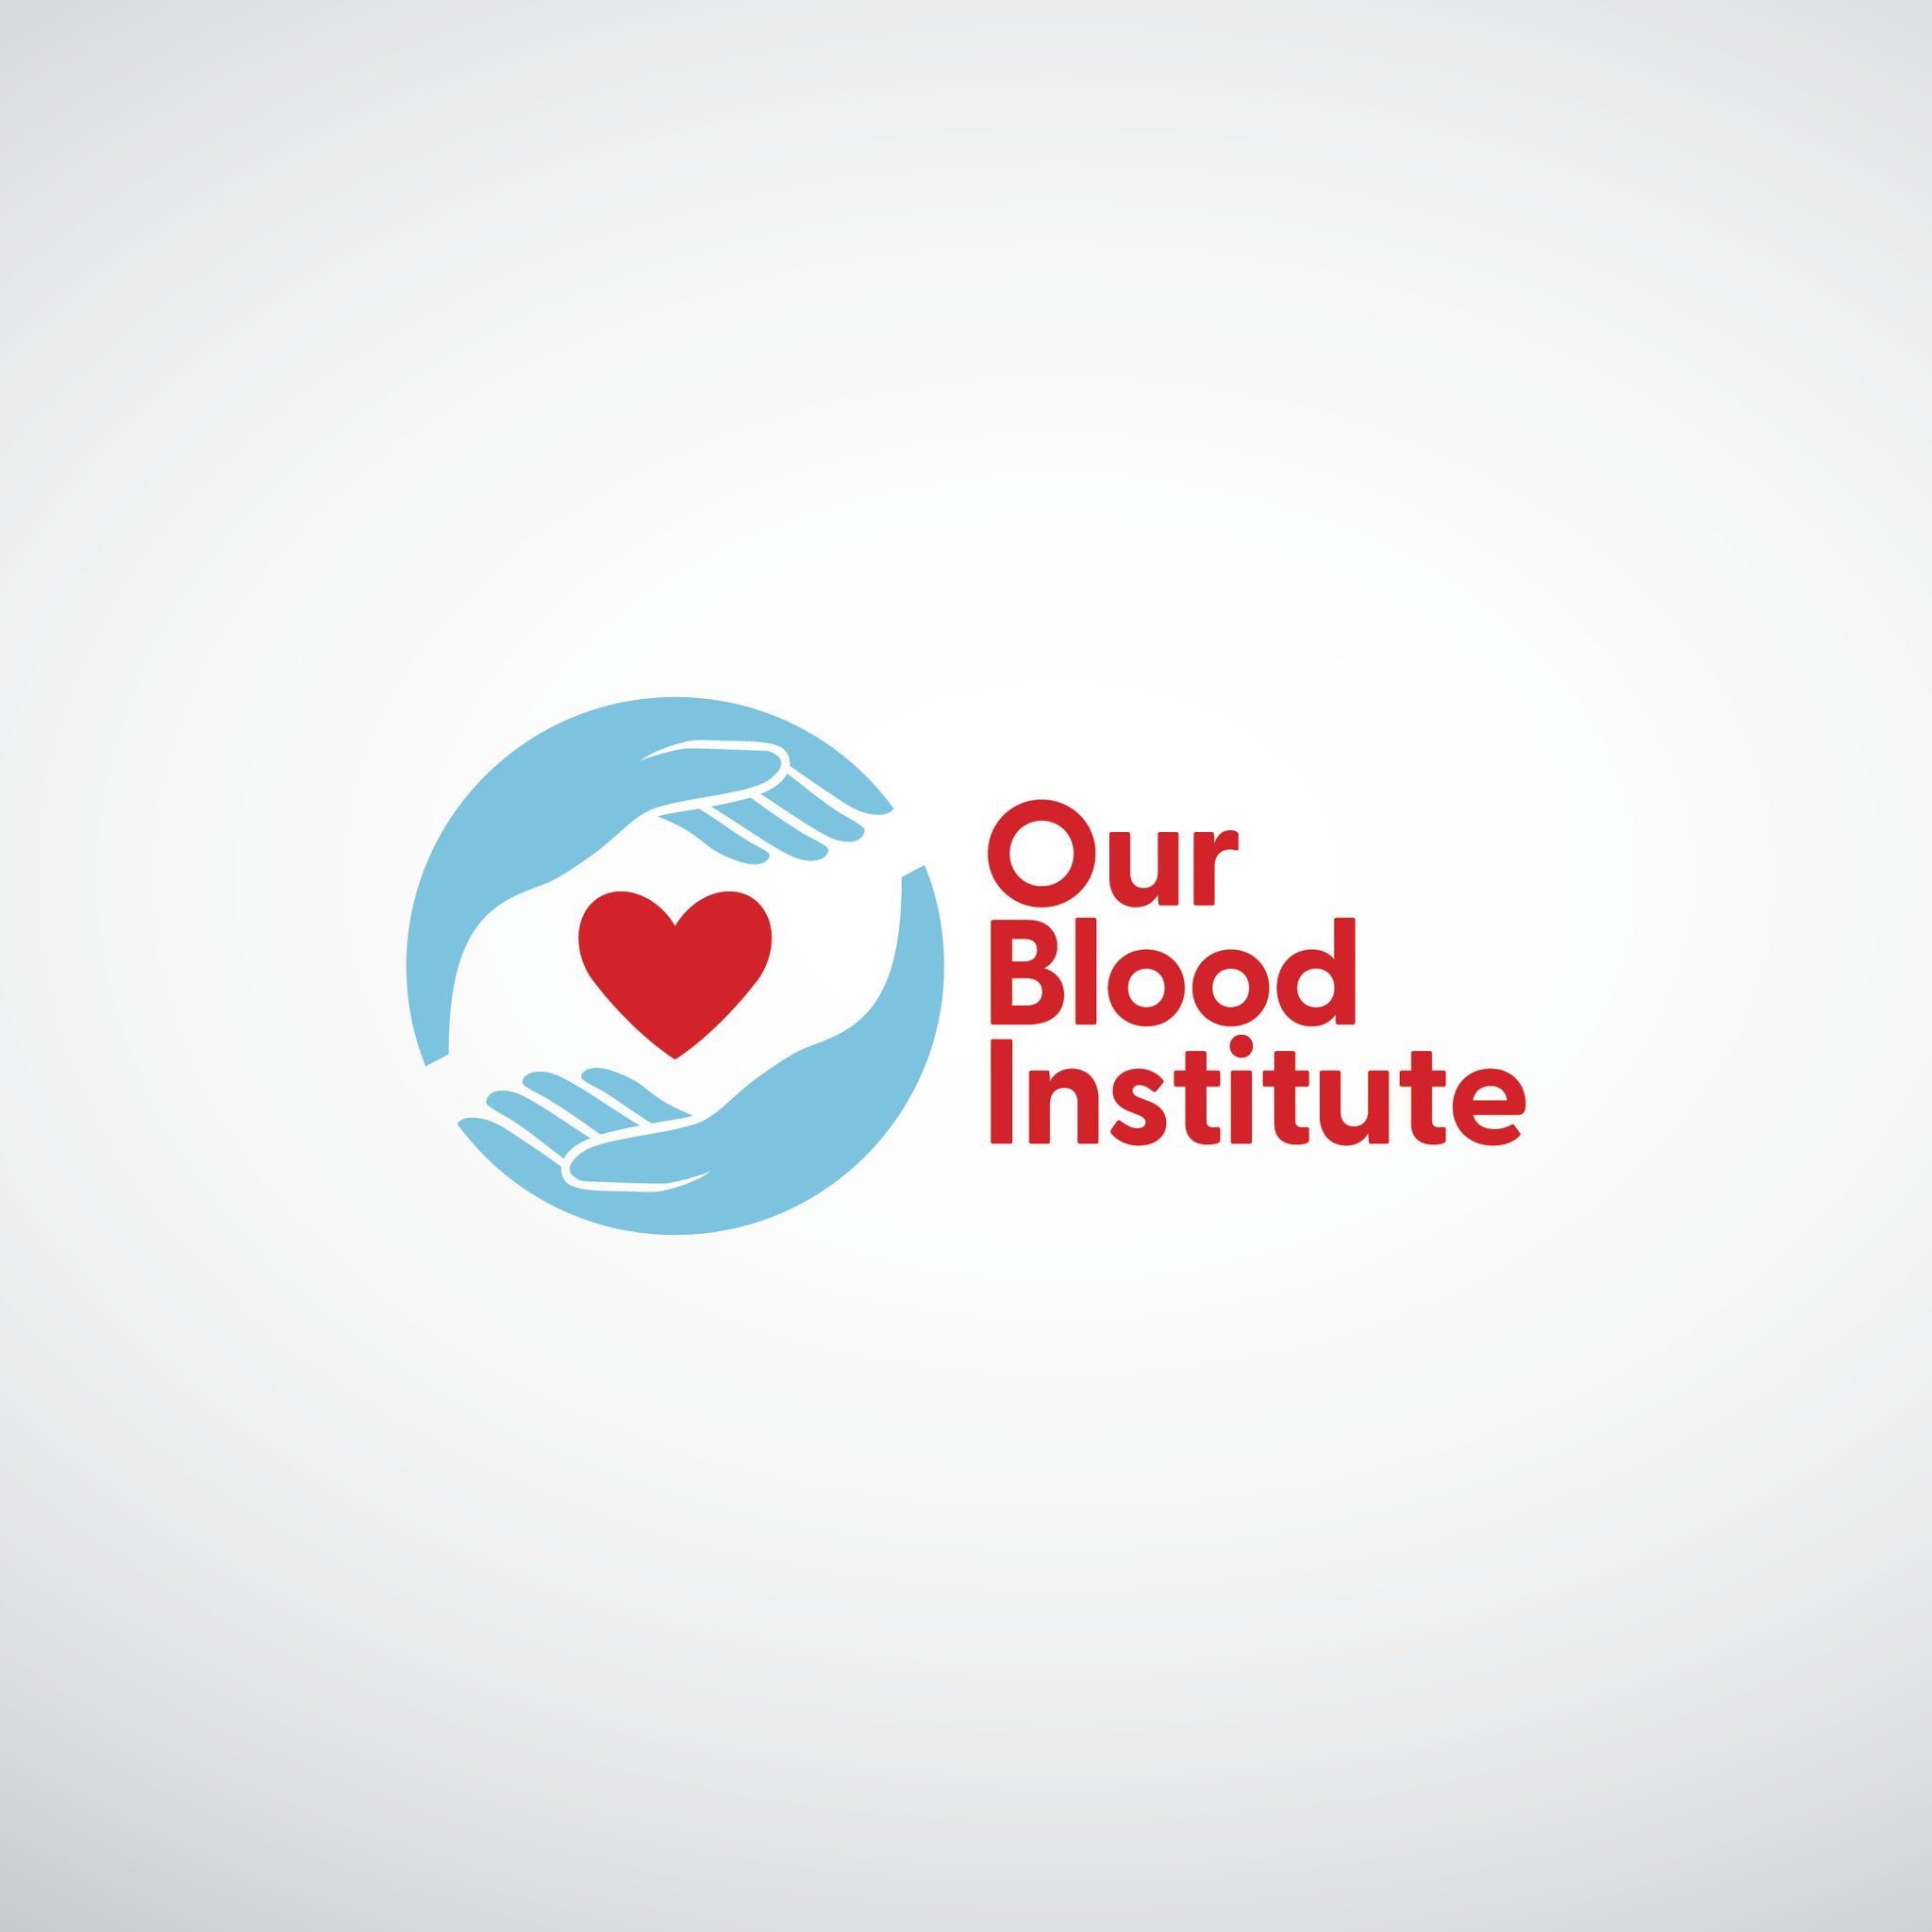 Oklahoma Blood Institute (Our Blood Institute)